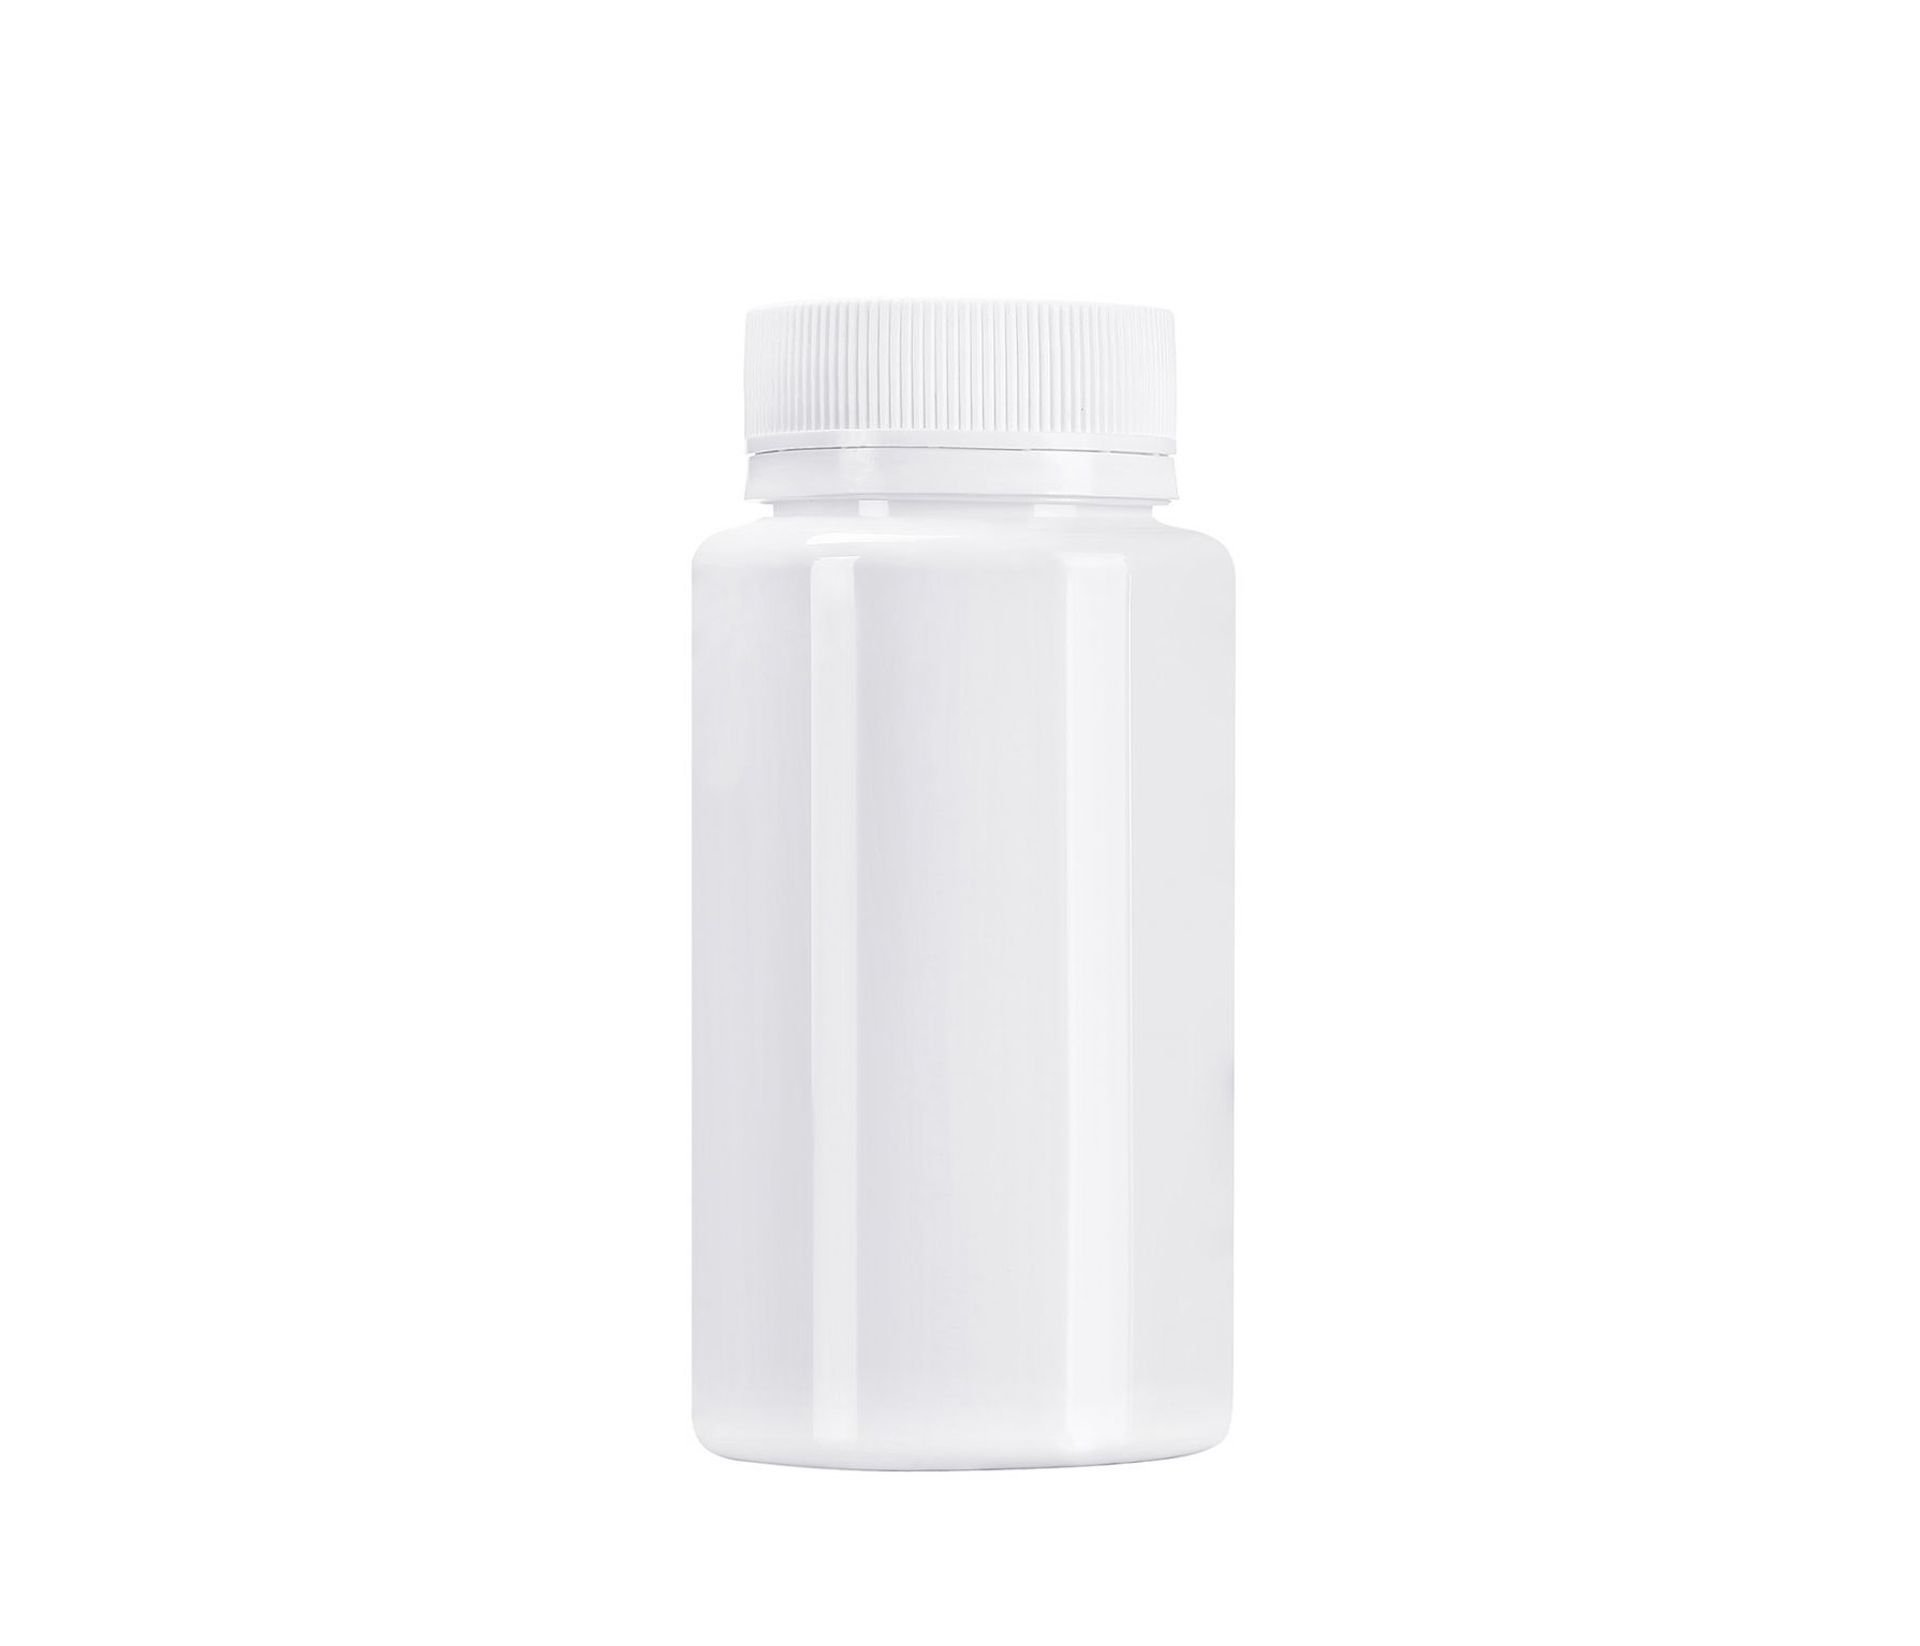 Medical capsule container K1.3-200 by Pack Store Europe, packstore.eu